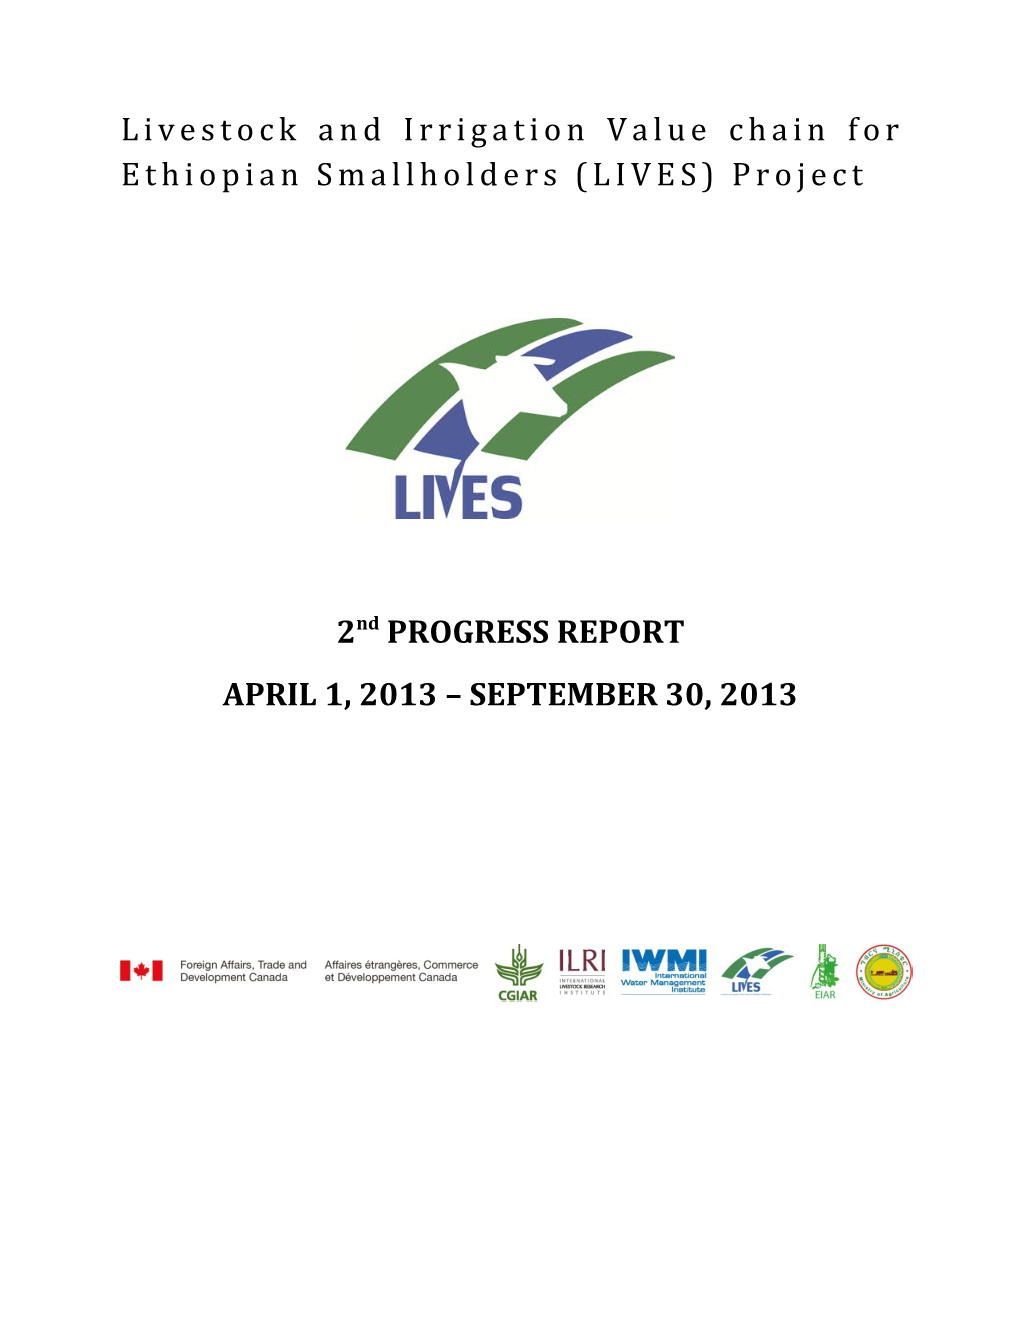 Livestock and Irrigation Value Chain for Ethiopian Smallholders (LIVES) Project